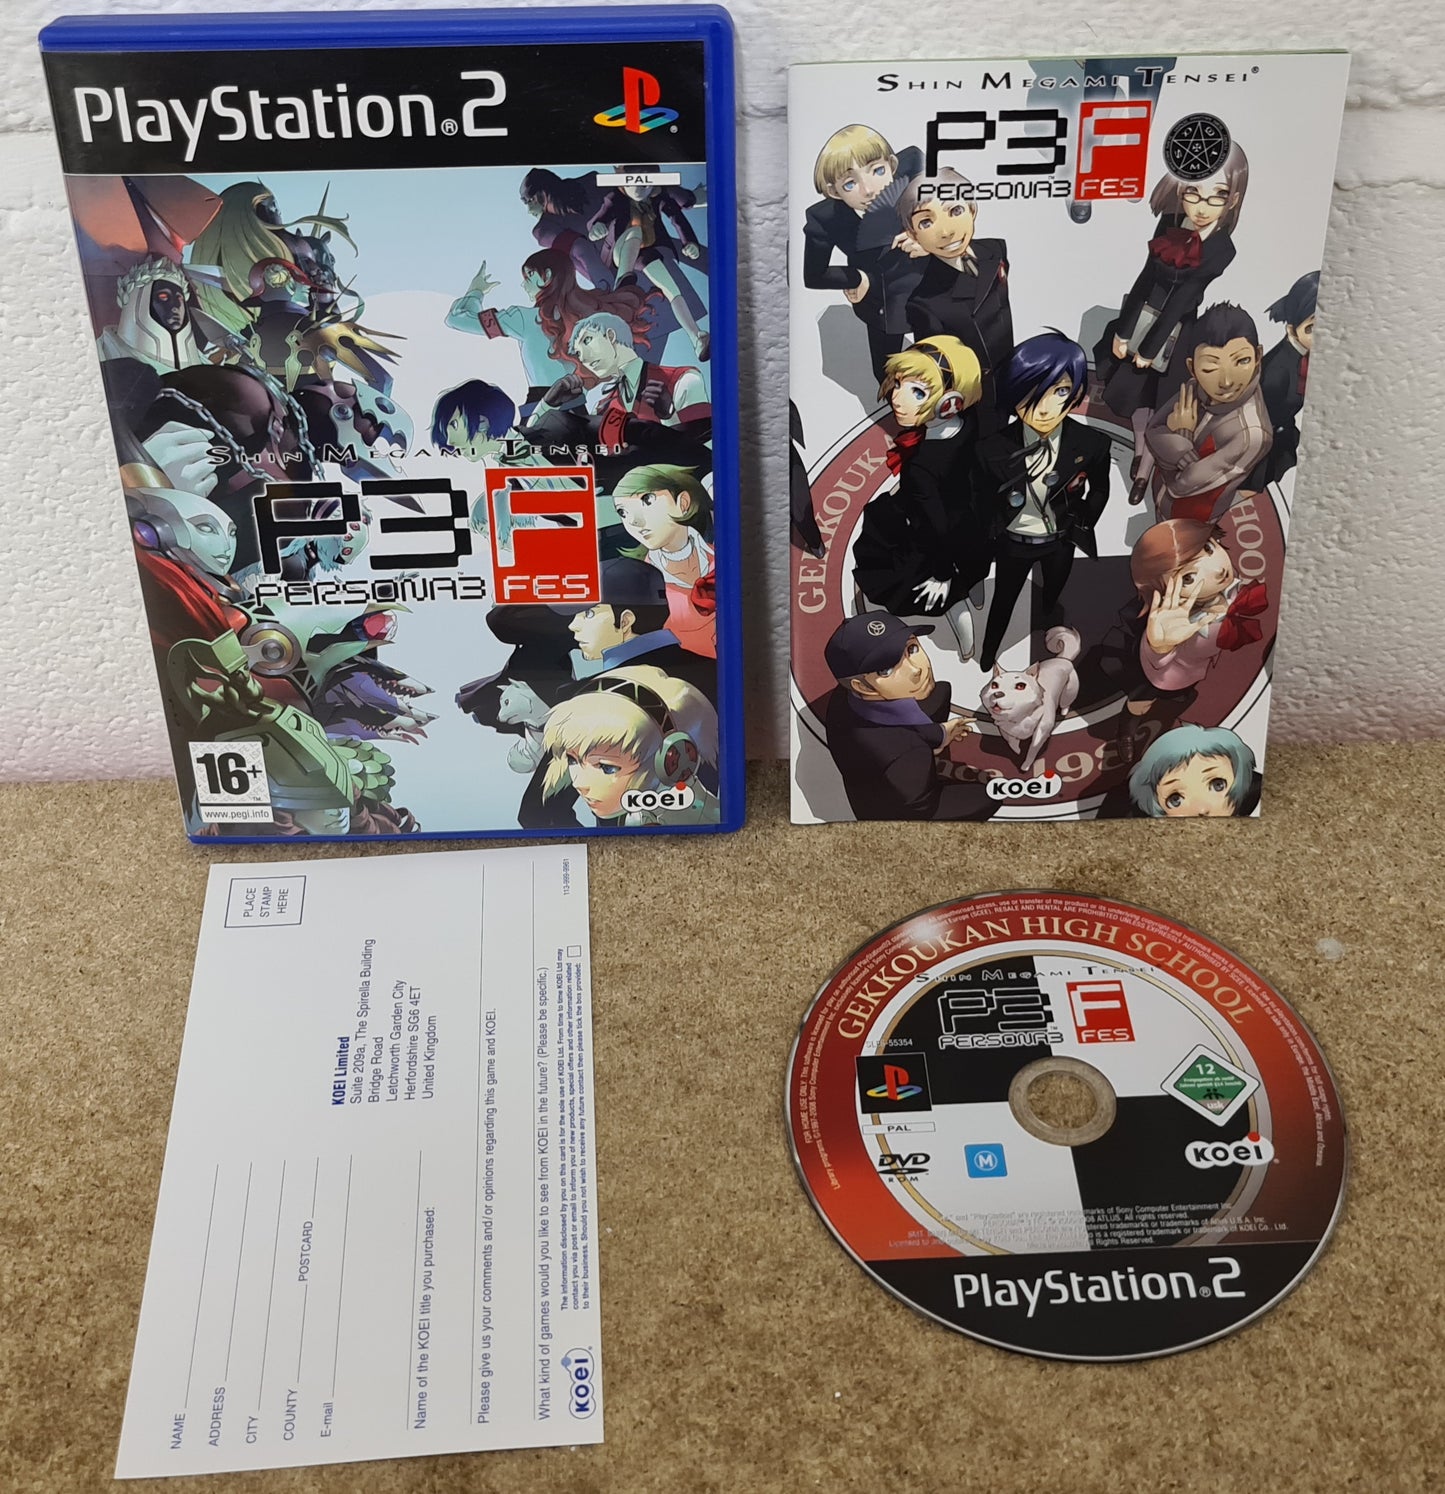 Persona 3 FES Sony Playstation 2 (PS2) Game